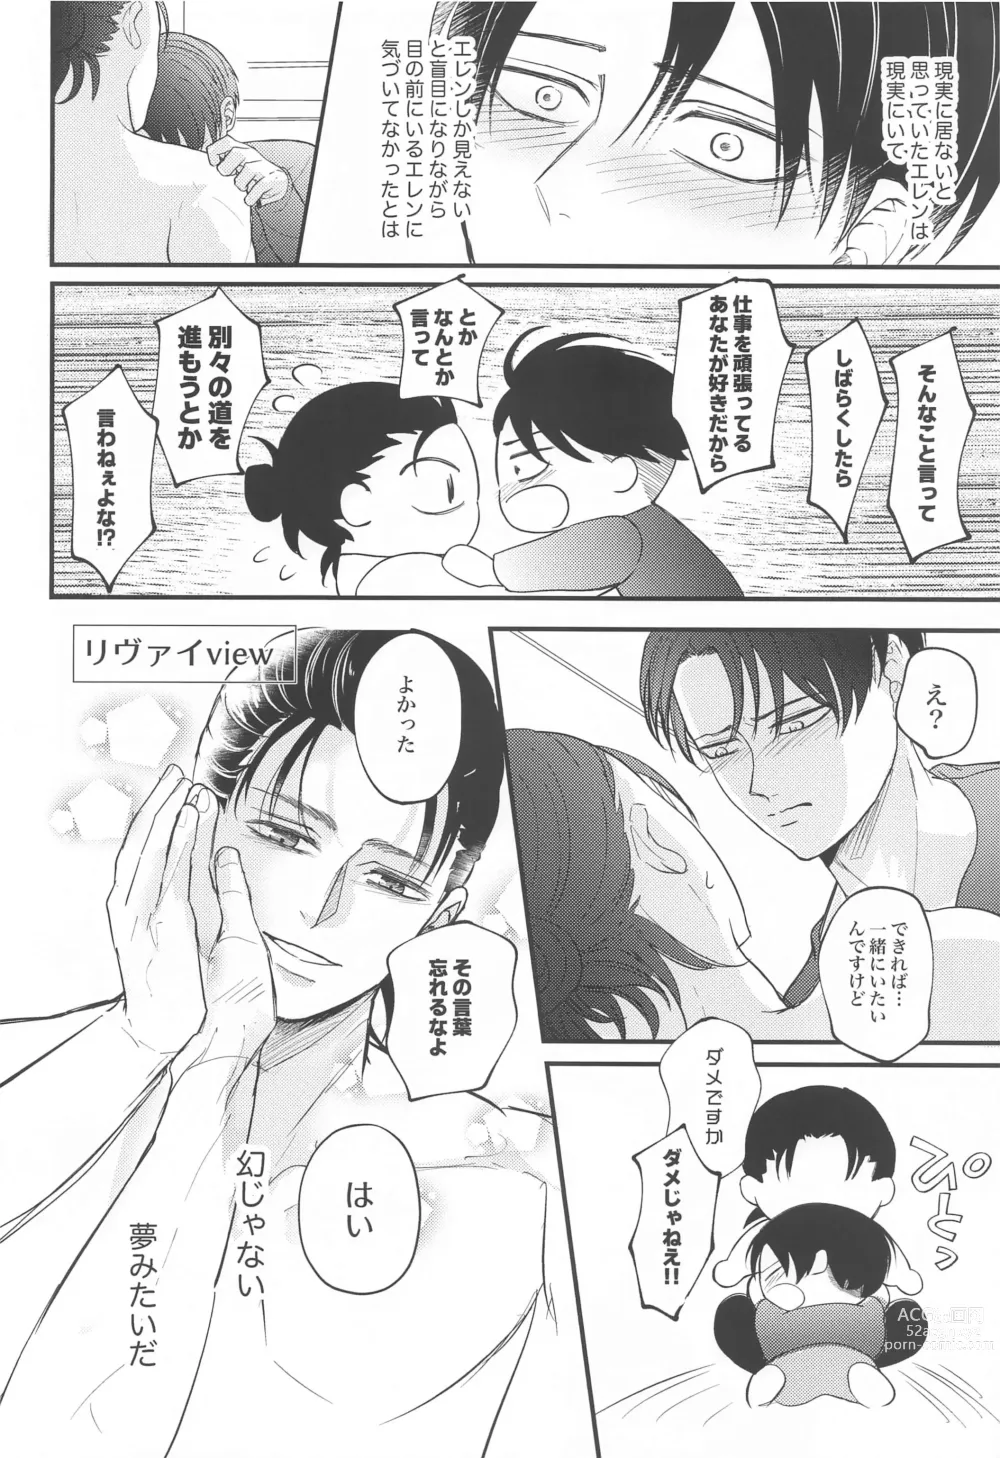 Page 47 of doujinshi Miracle Game